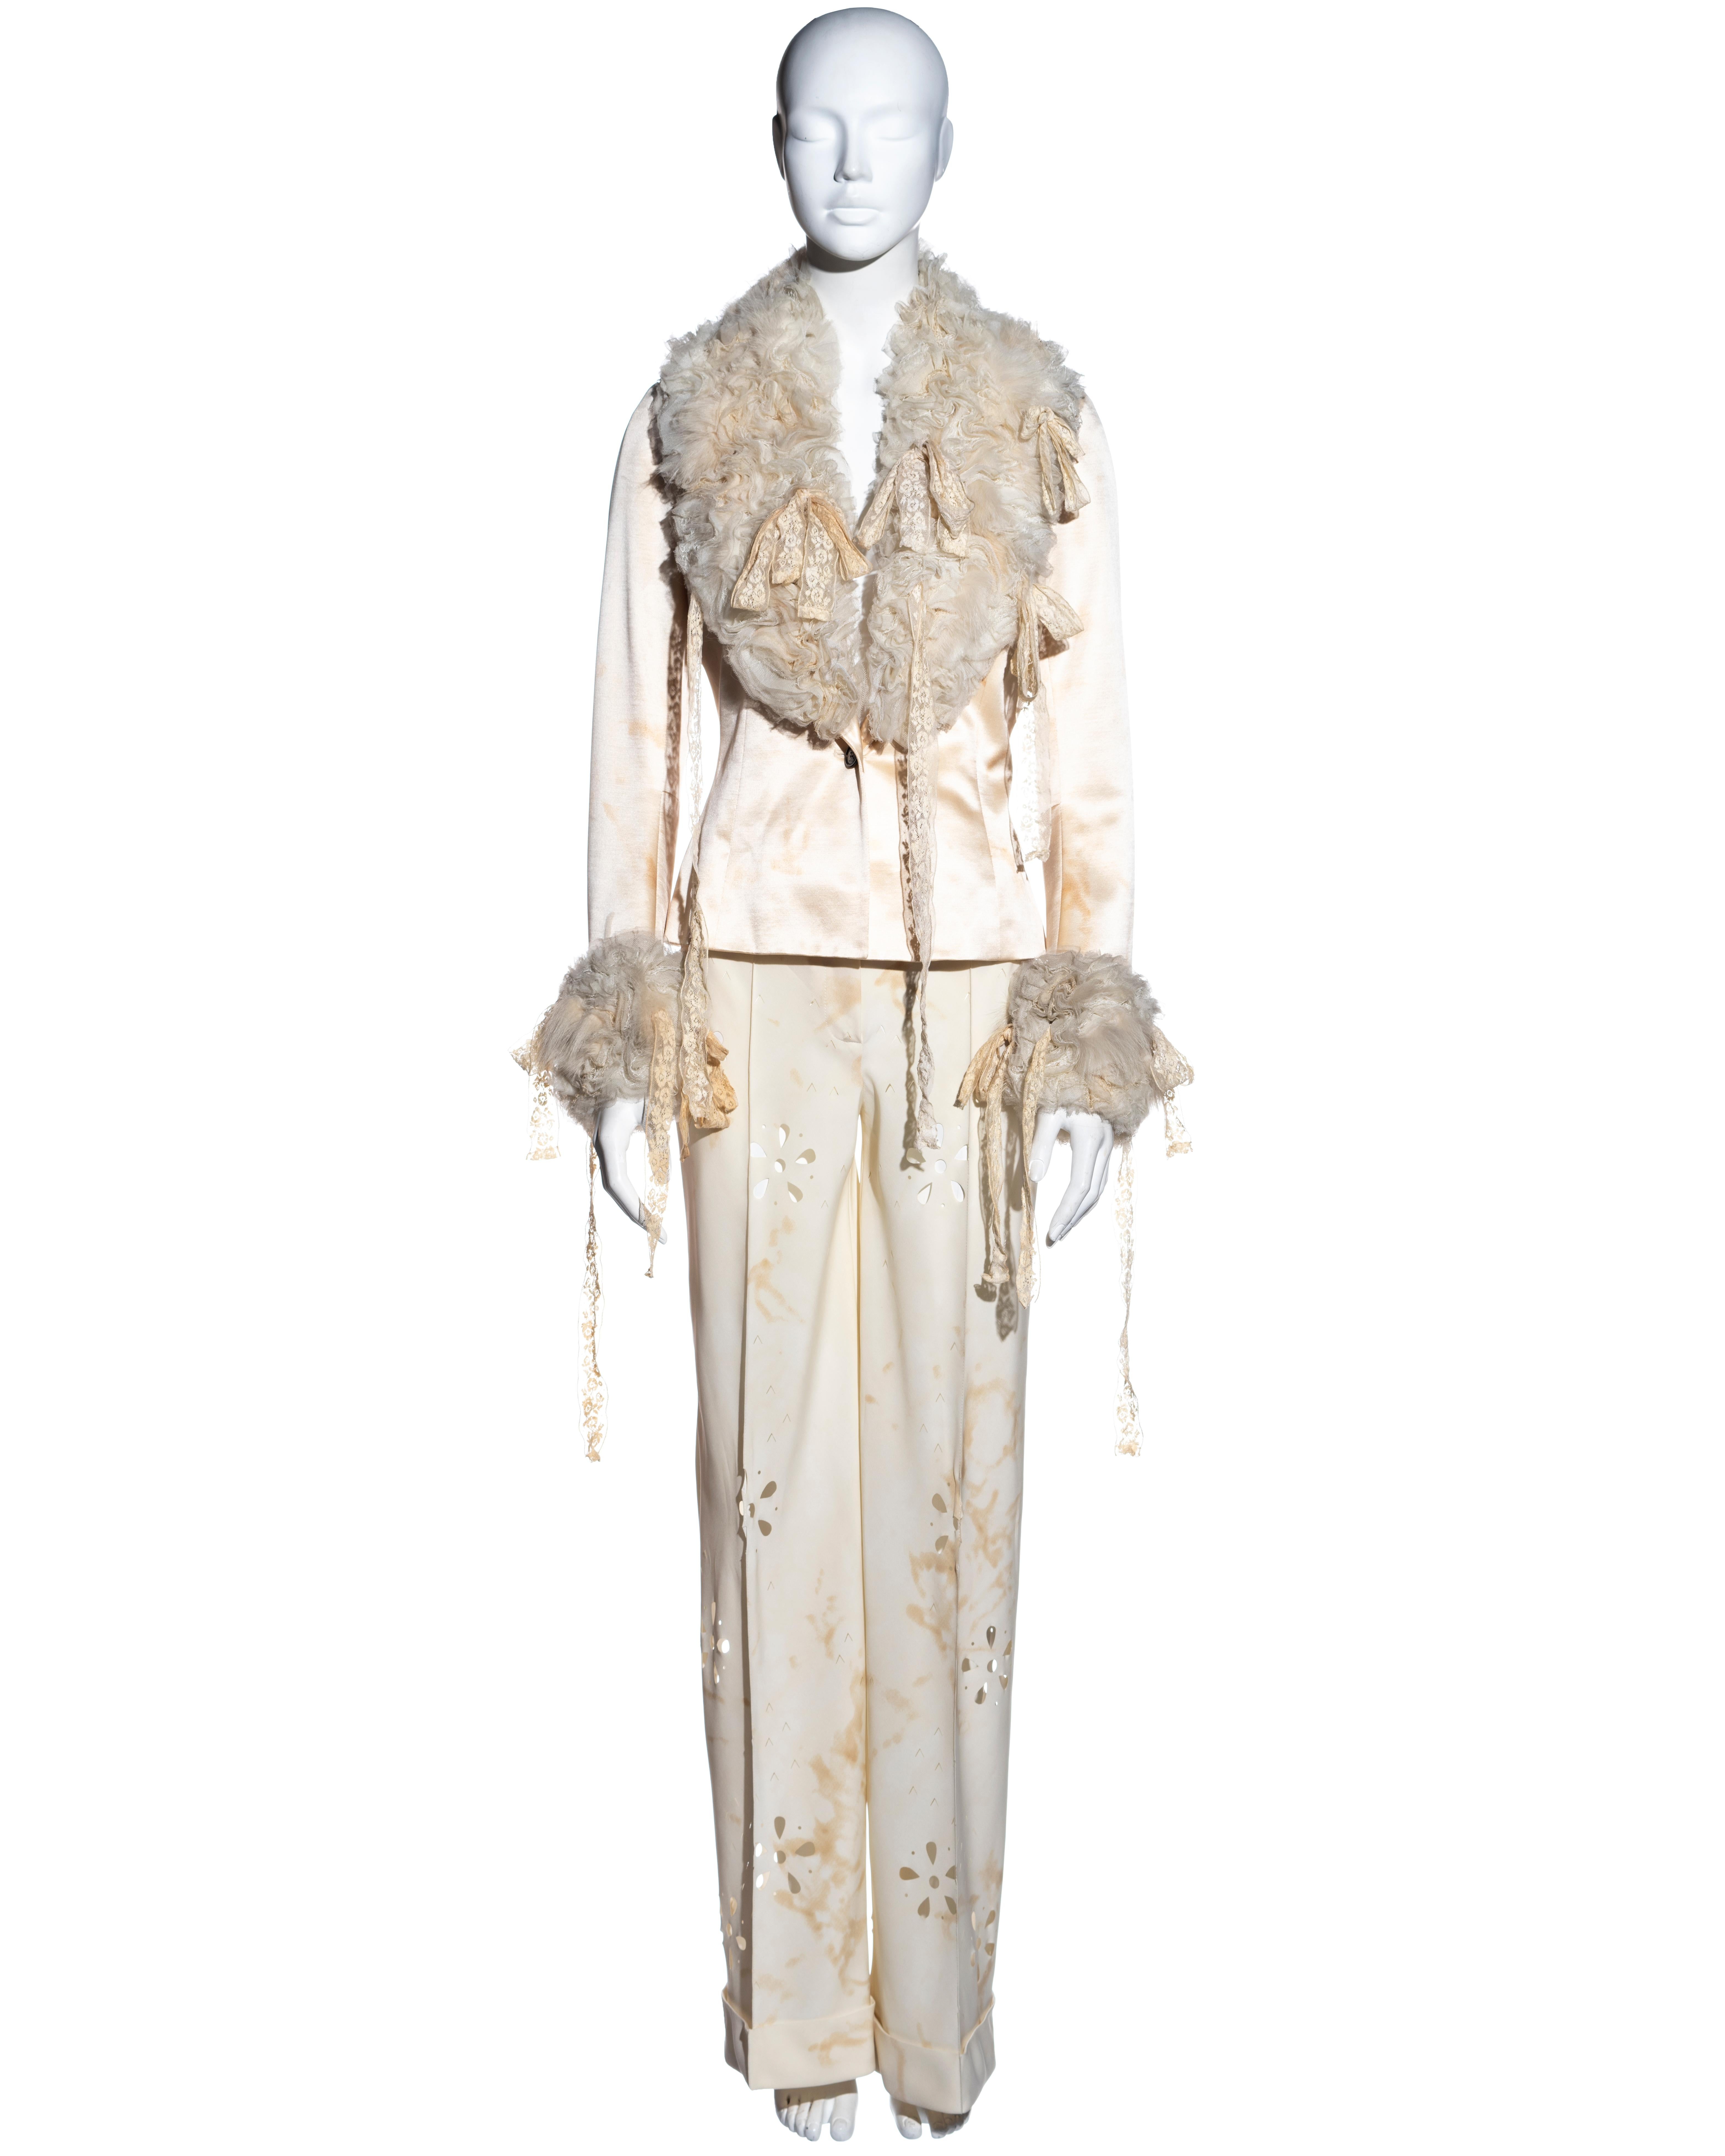 ▪ John Galliano cream silk pantsuit 
▪ Single-breast jacket with large collar and cuffs of ruffled antique lace ribbons and Mongolian lamb 
▪ Wide-leg pants with turn-ups and laser cut-outs 
▪ Designed with tea stains throughout to make the garment